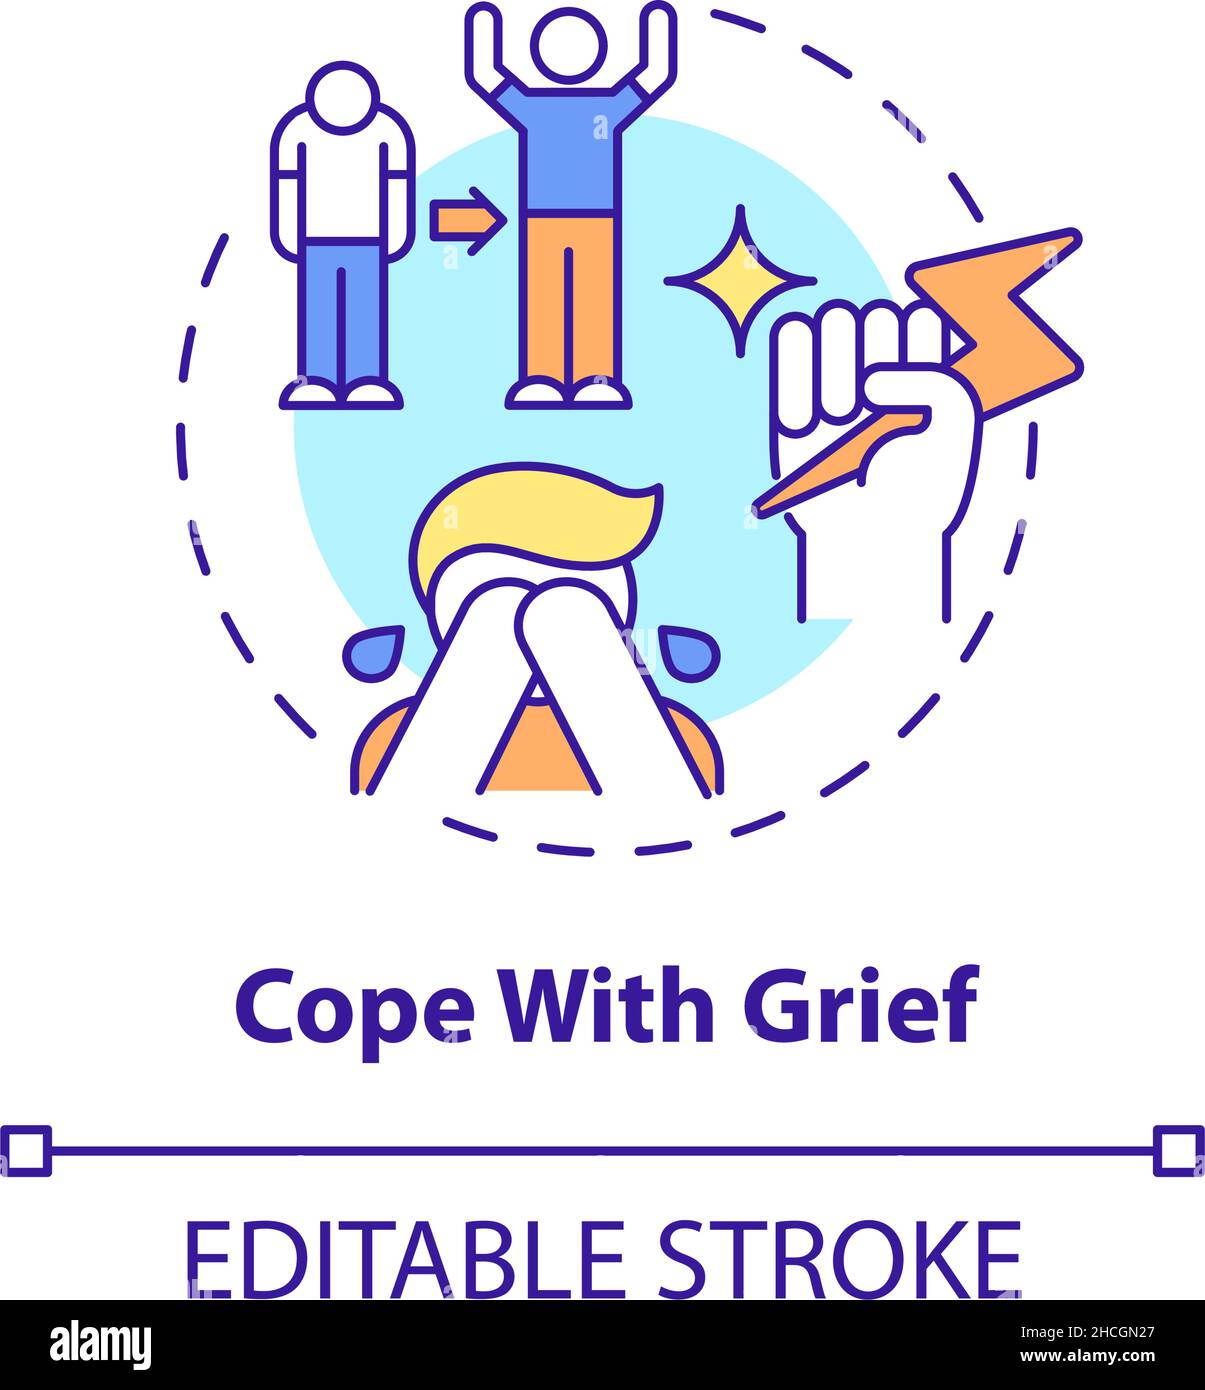 Cope with grief concept icon Stock Vector